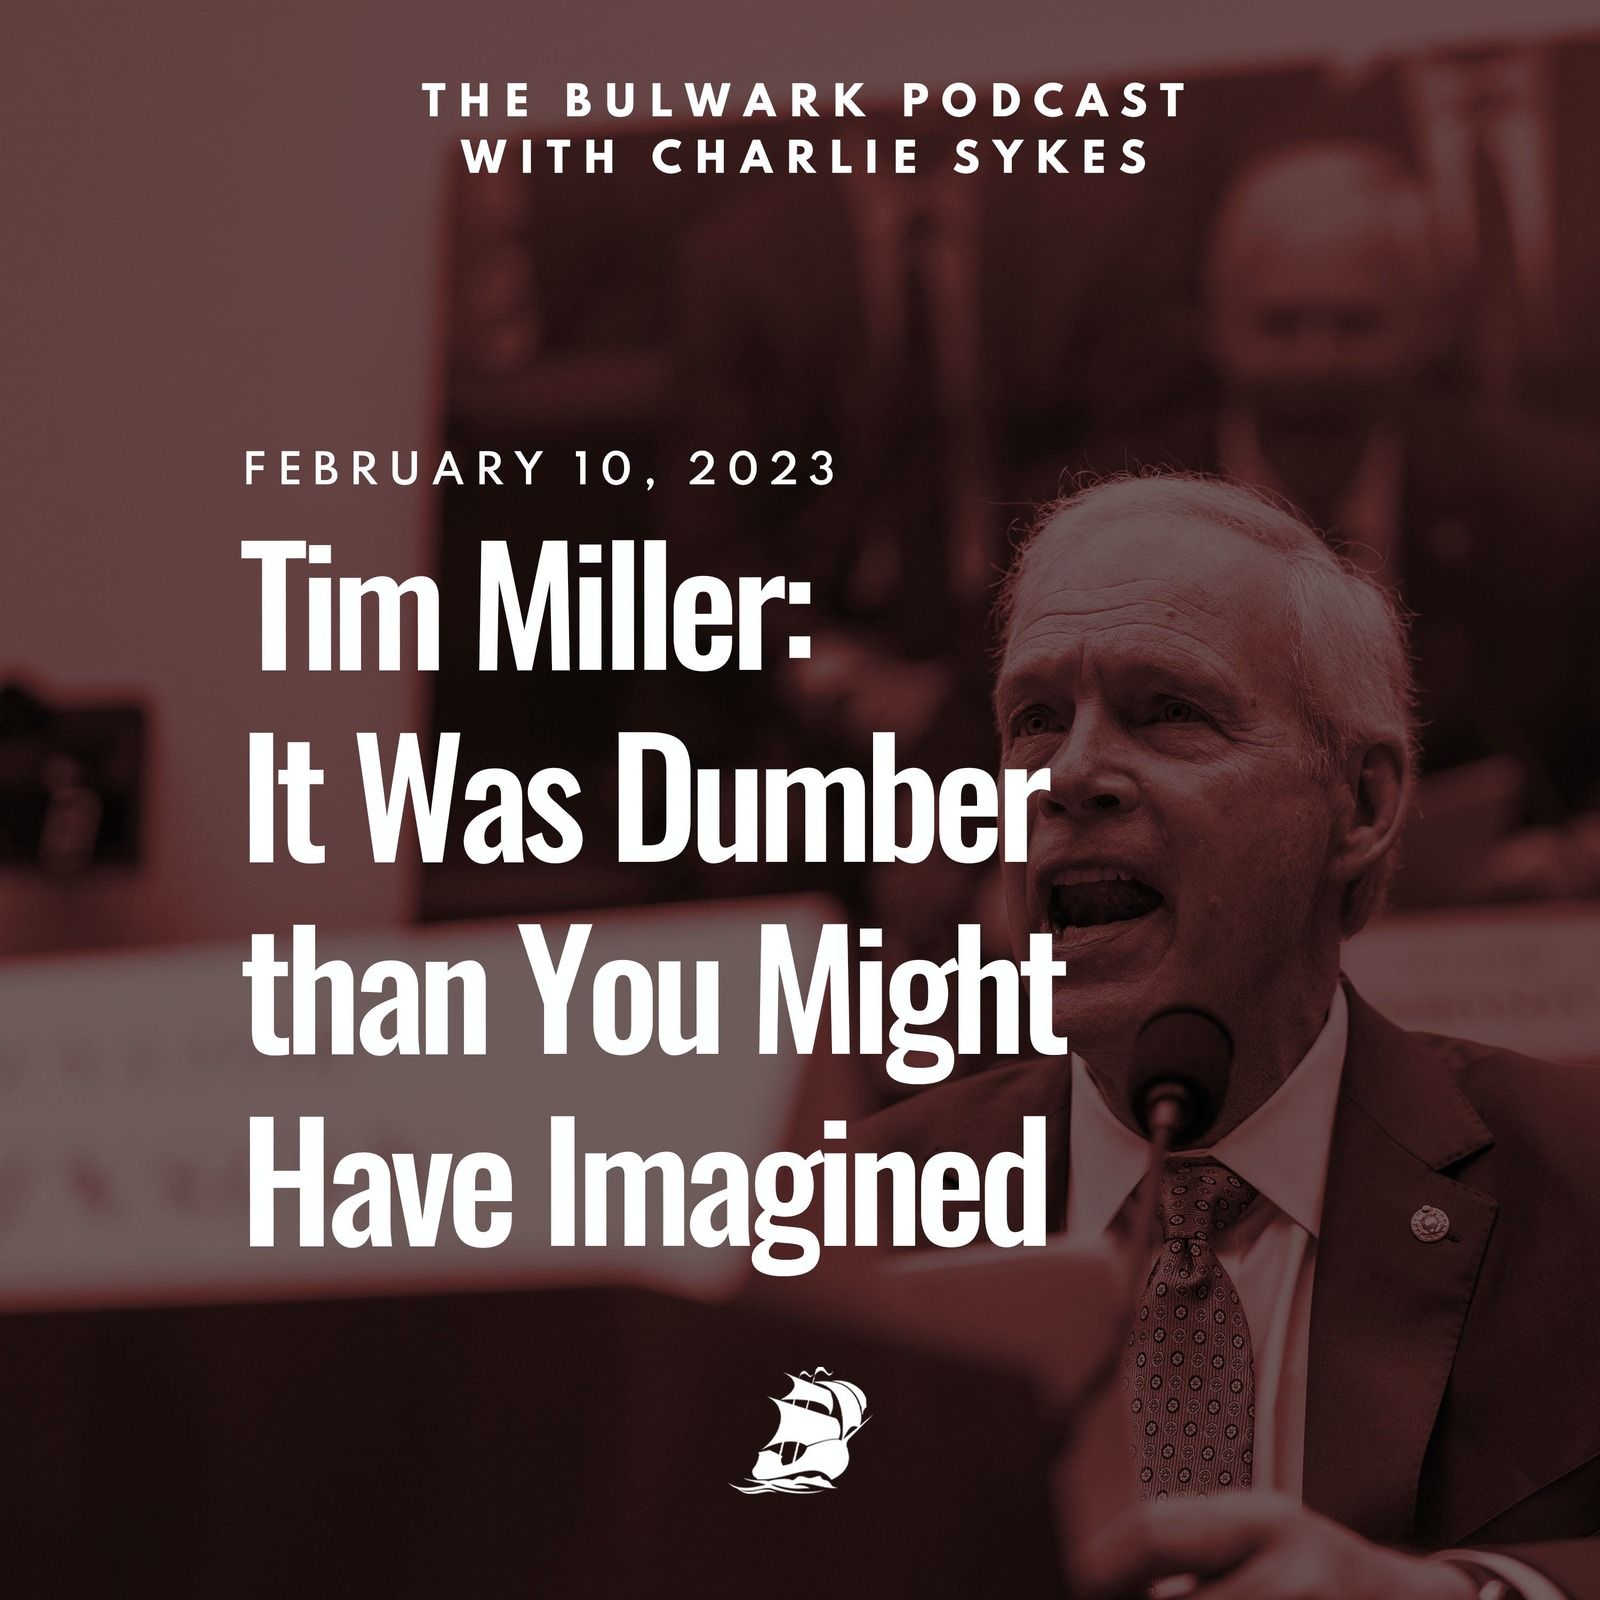 Tim Miller: It Was Dumber than You Might Have Imagined